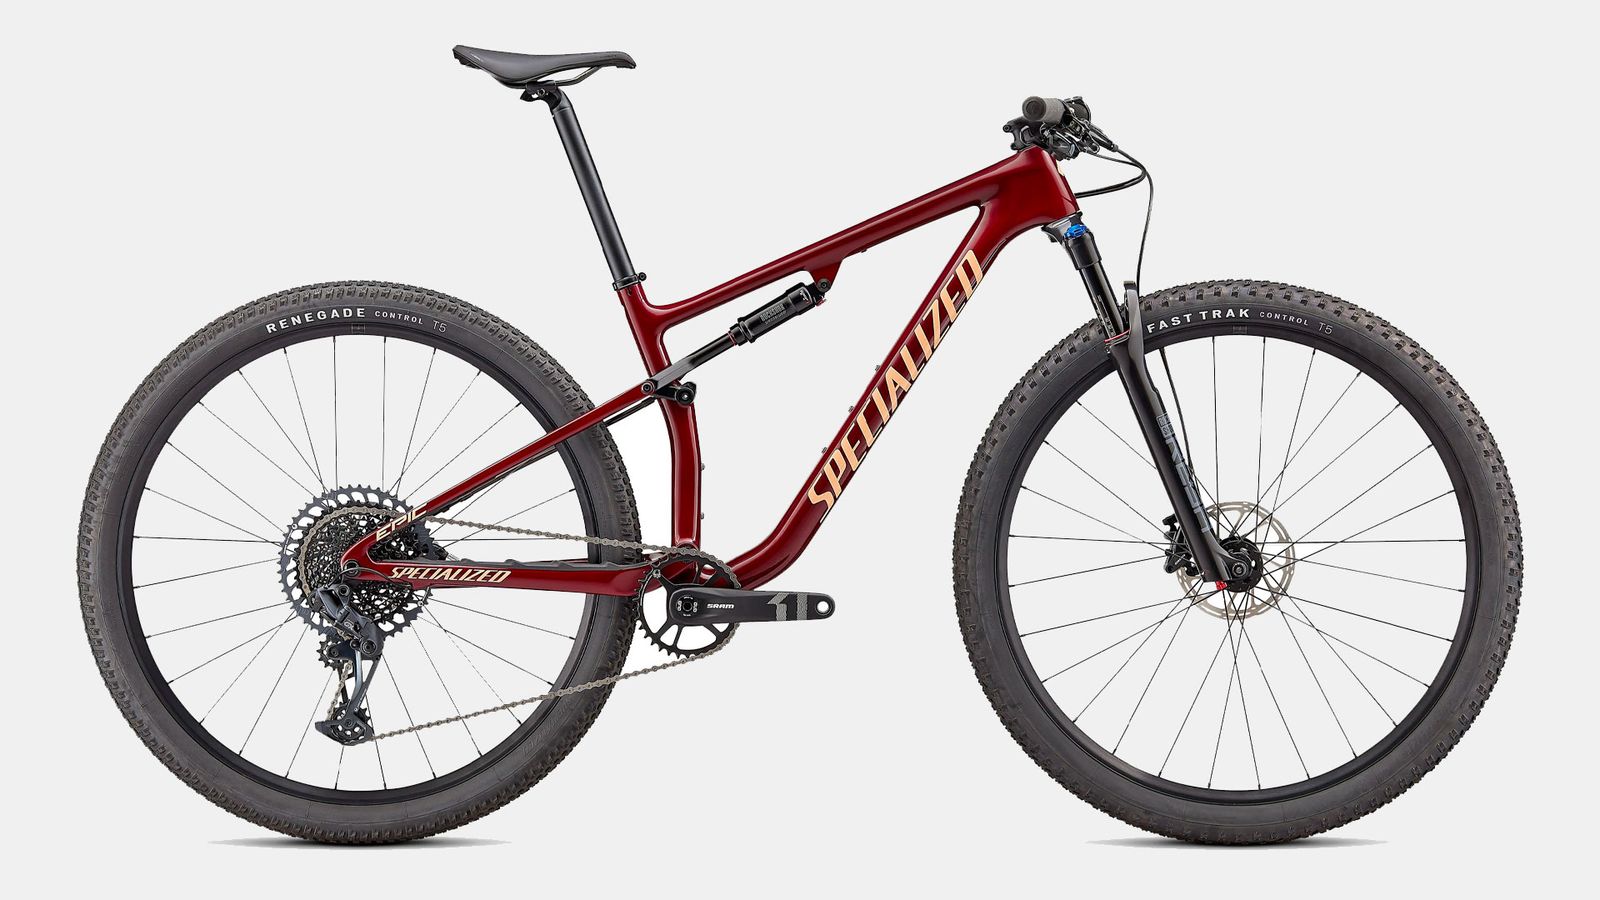 Best mountain bike Specialized product image of a red-framed bike.